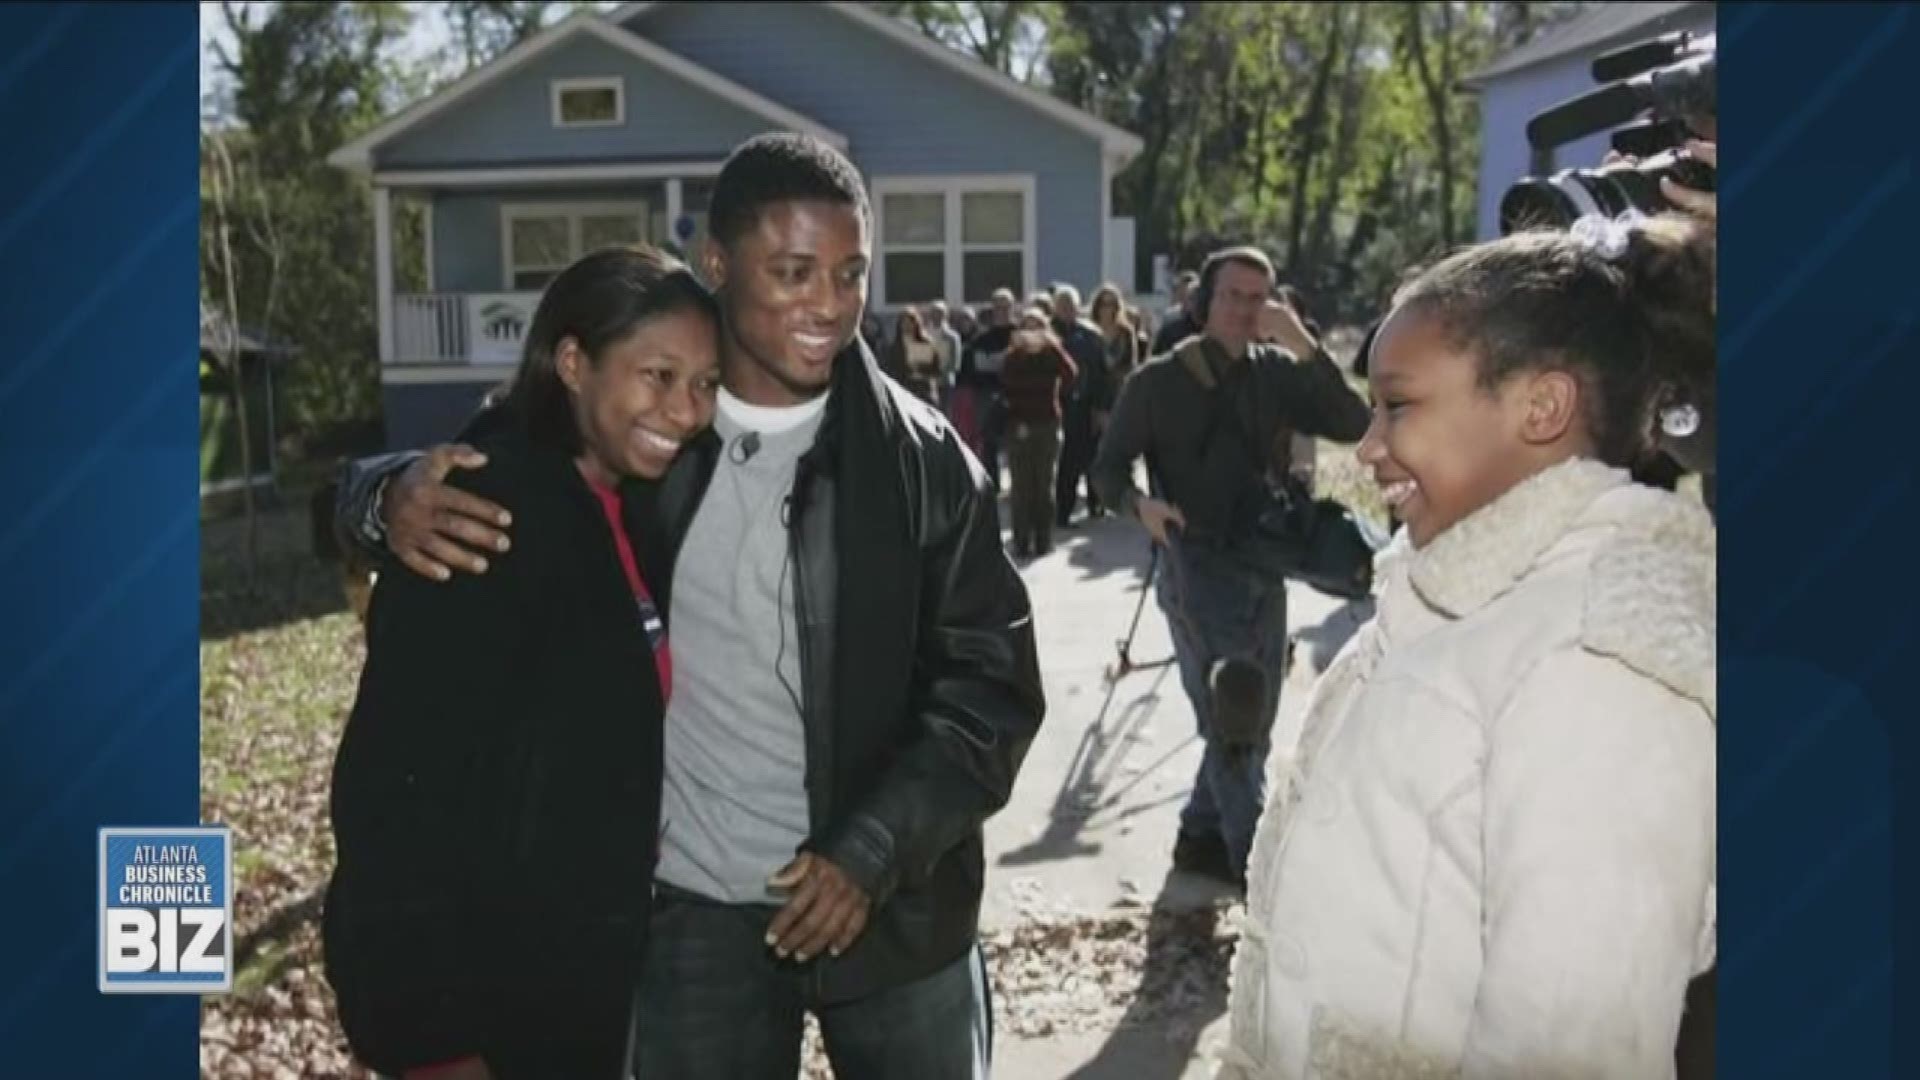 The American Dream! Former NFL player Warrick Dunn is making dreams come true for families in need through his Warrick Dunn Charities.